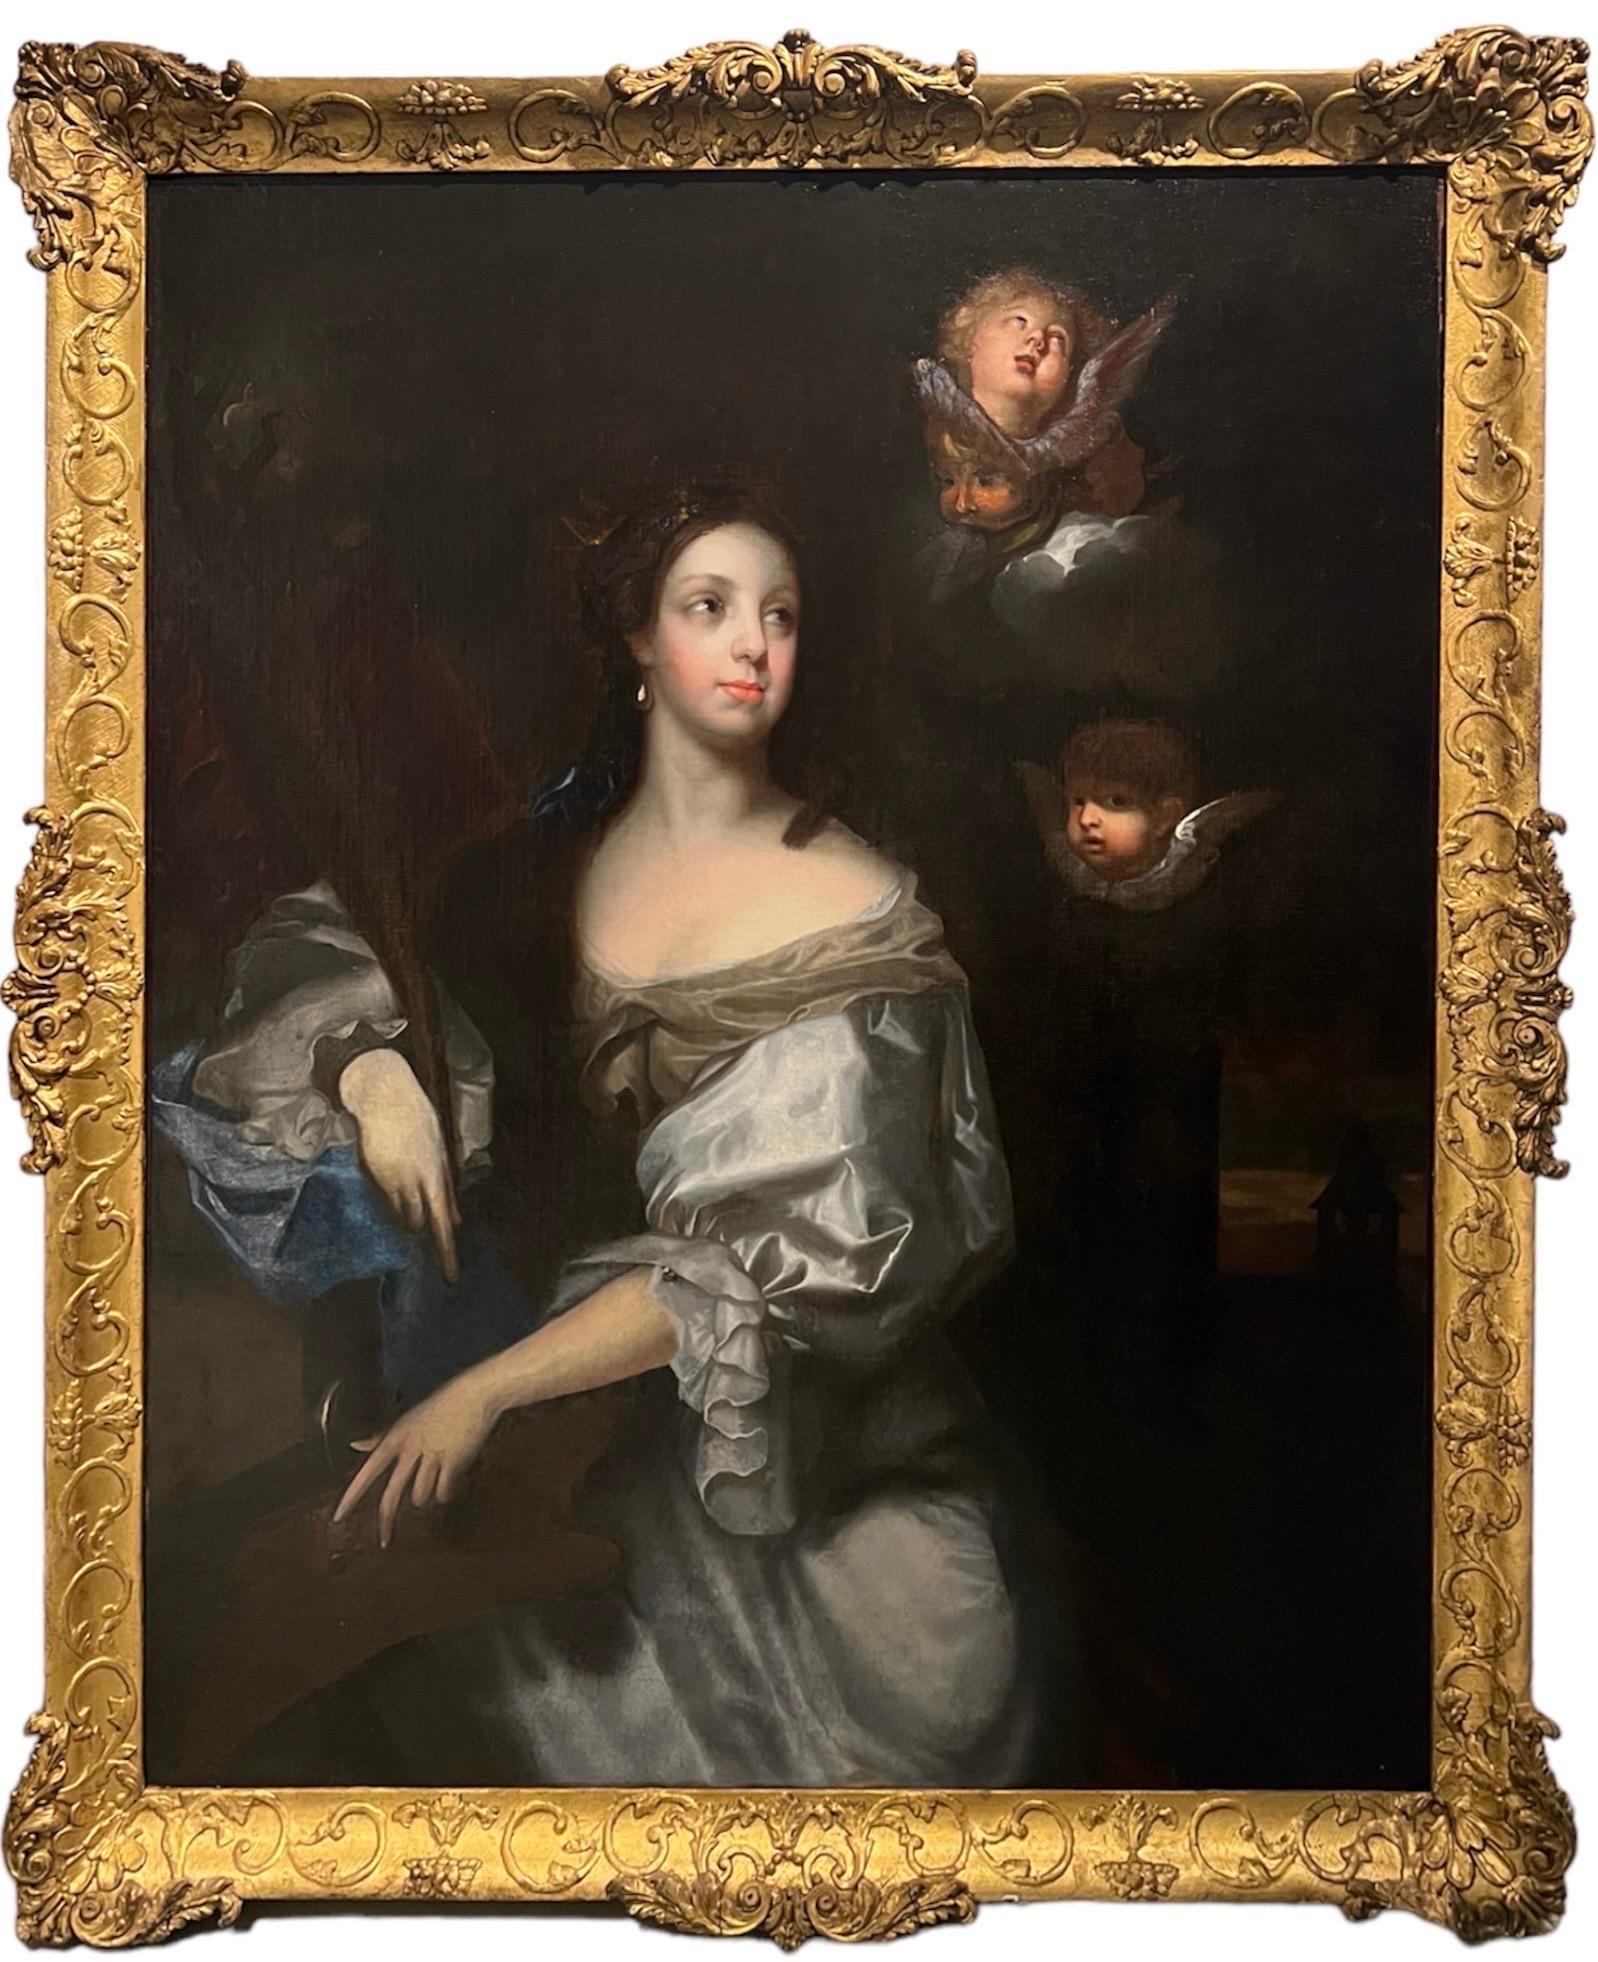 Jacob Huysmans Figurative Painting - 17th century Old Master Portrait of Queen Catherine of Braganza